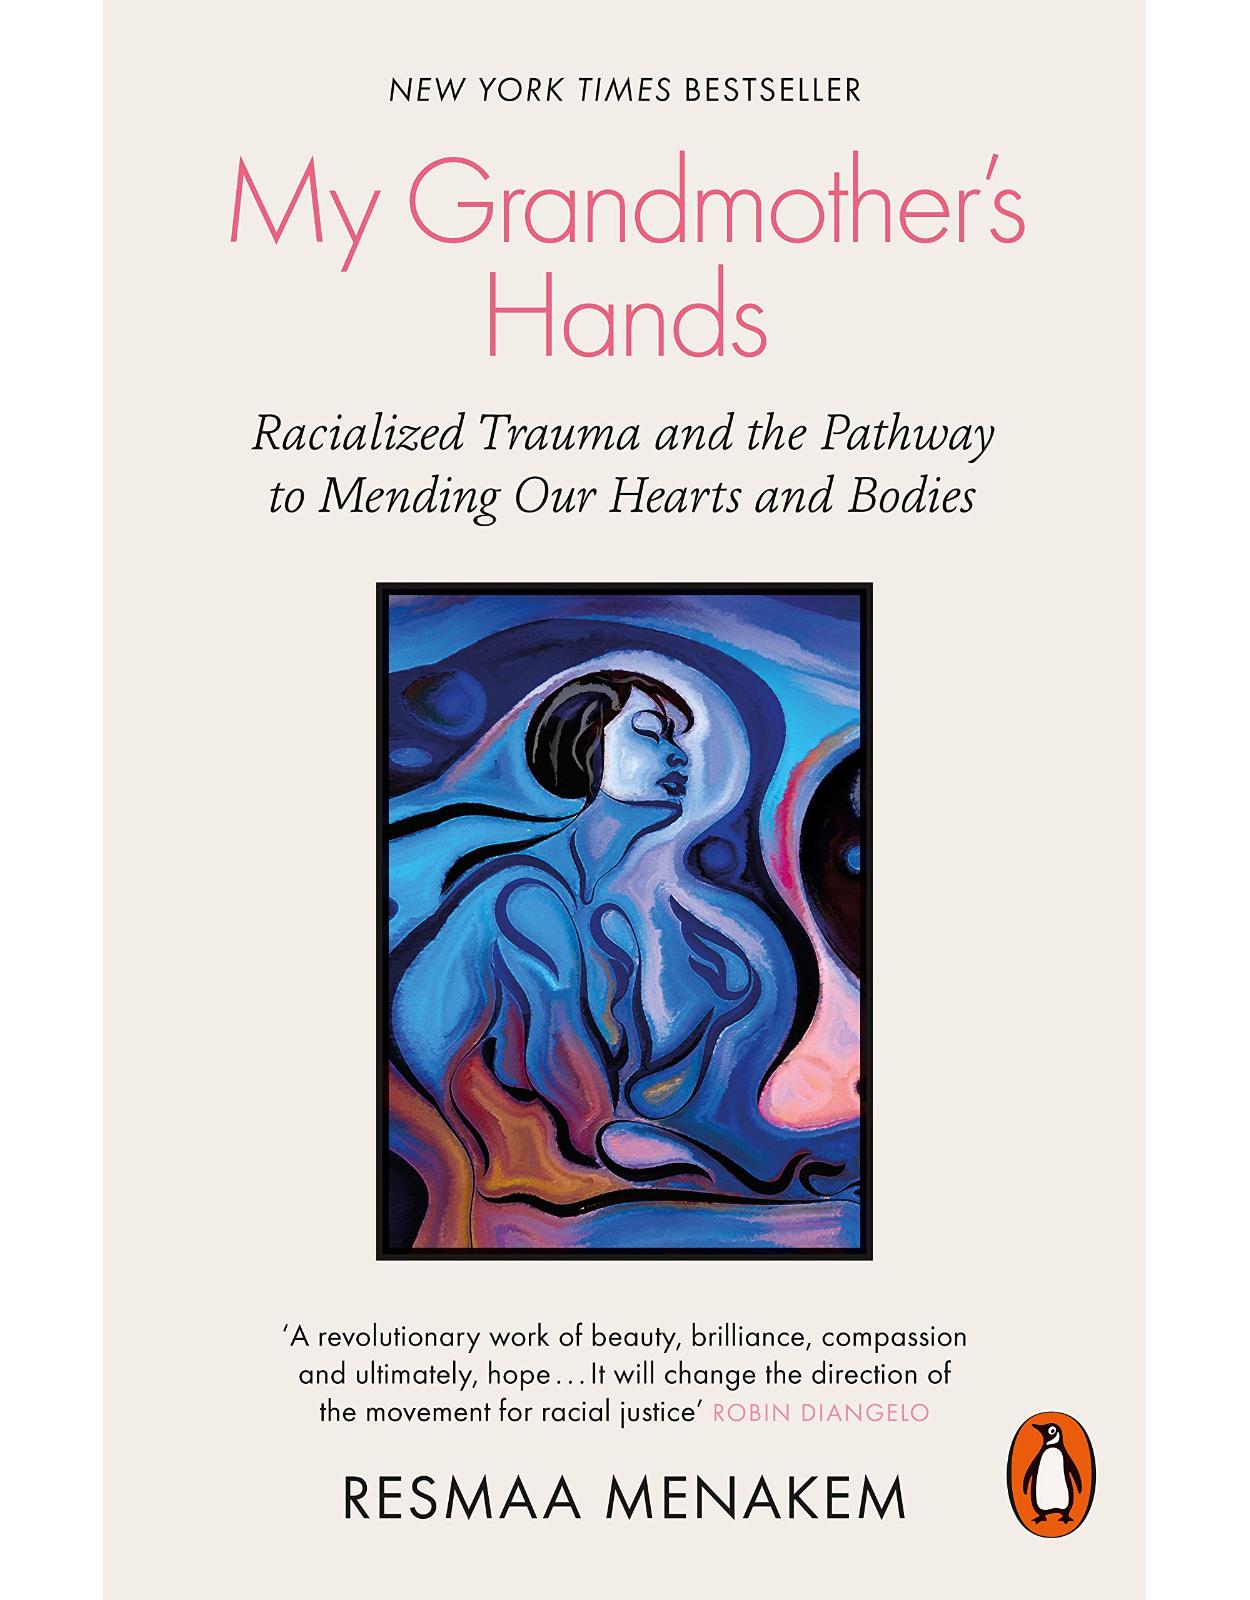 My Grandmother's Hands: Racialized Trauma and the Pathway to Mending Our Hearts and Bodies